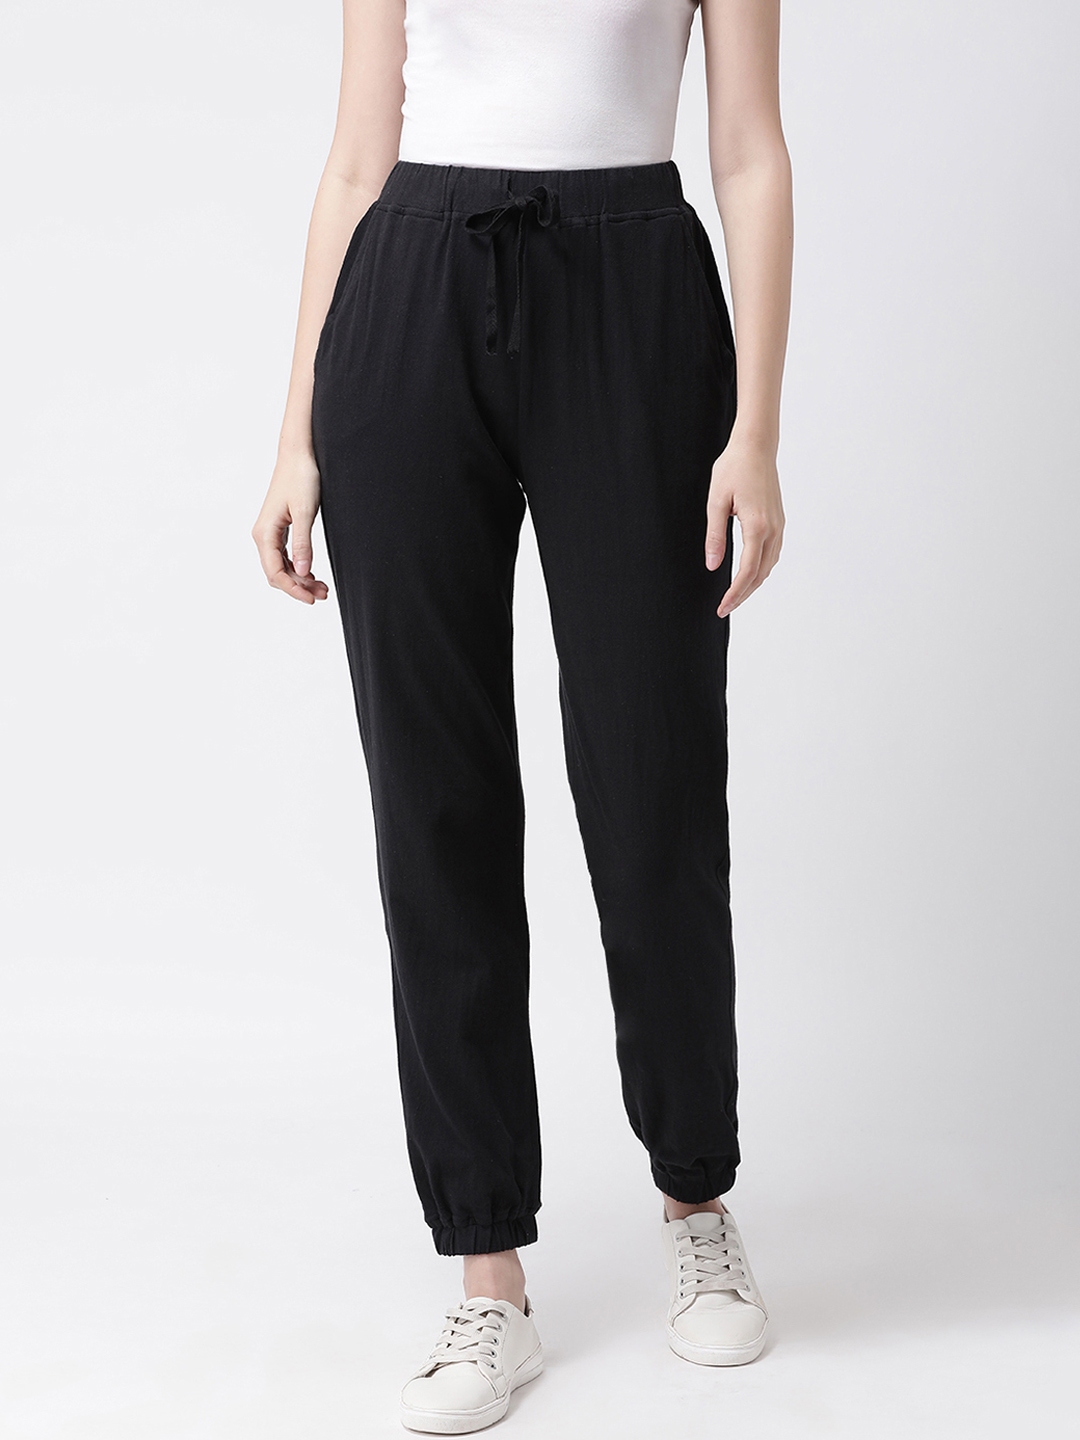 Buy Online Black Cotton Polyester Jogger Pants for Women  Girls at Best  Prices in Biba IndiaATHLEI